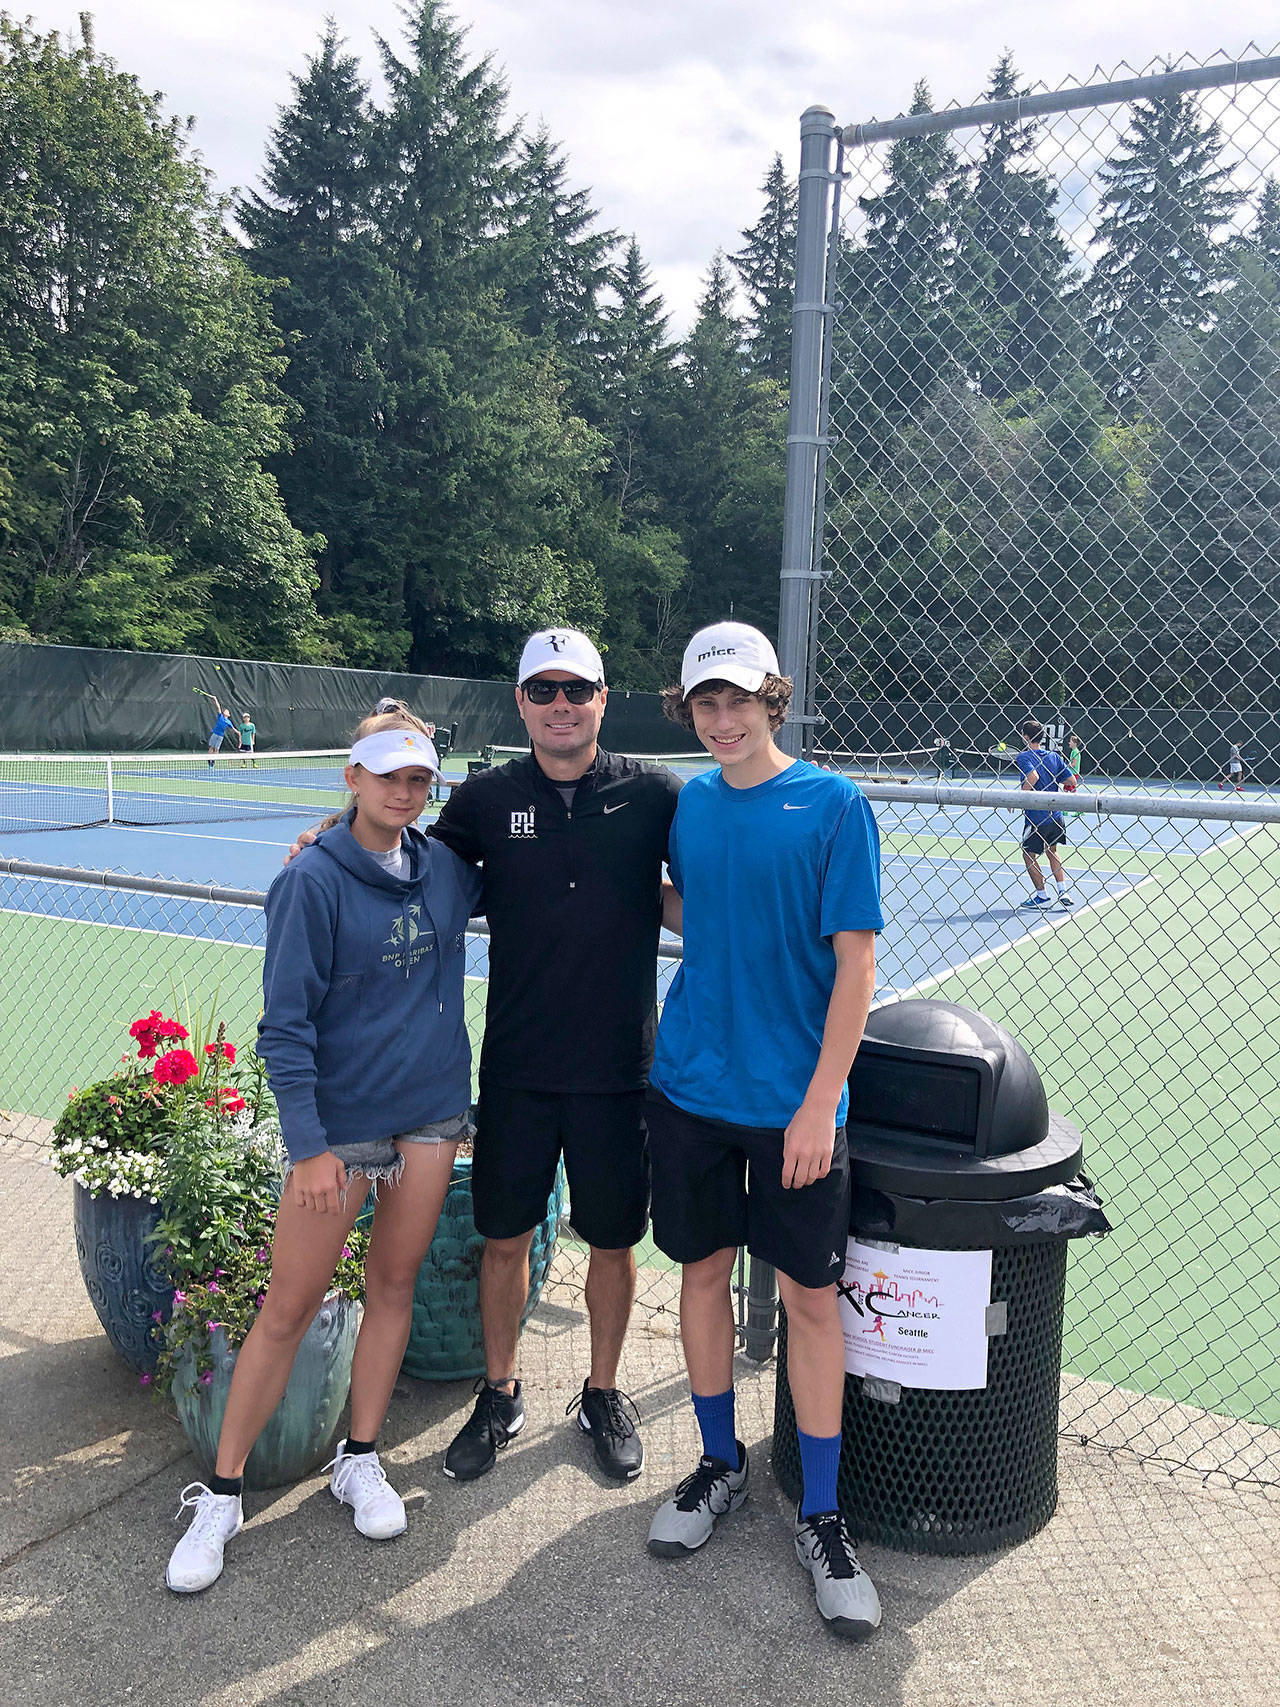 From left: middle schooler Valeriya Alekseykina, coach Jesse Walter, and Andrew Kaelin at the X-Out Cancer Fundraiser Jr. Tournament during the month of June. The team helped raise nearly $1658 which will help aid cancer families at Seattle Children’s. Courtesy photo of Gerry Kaelin